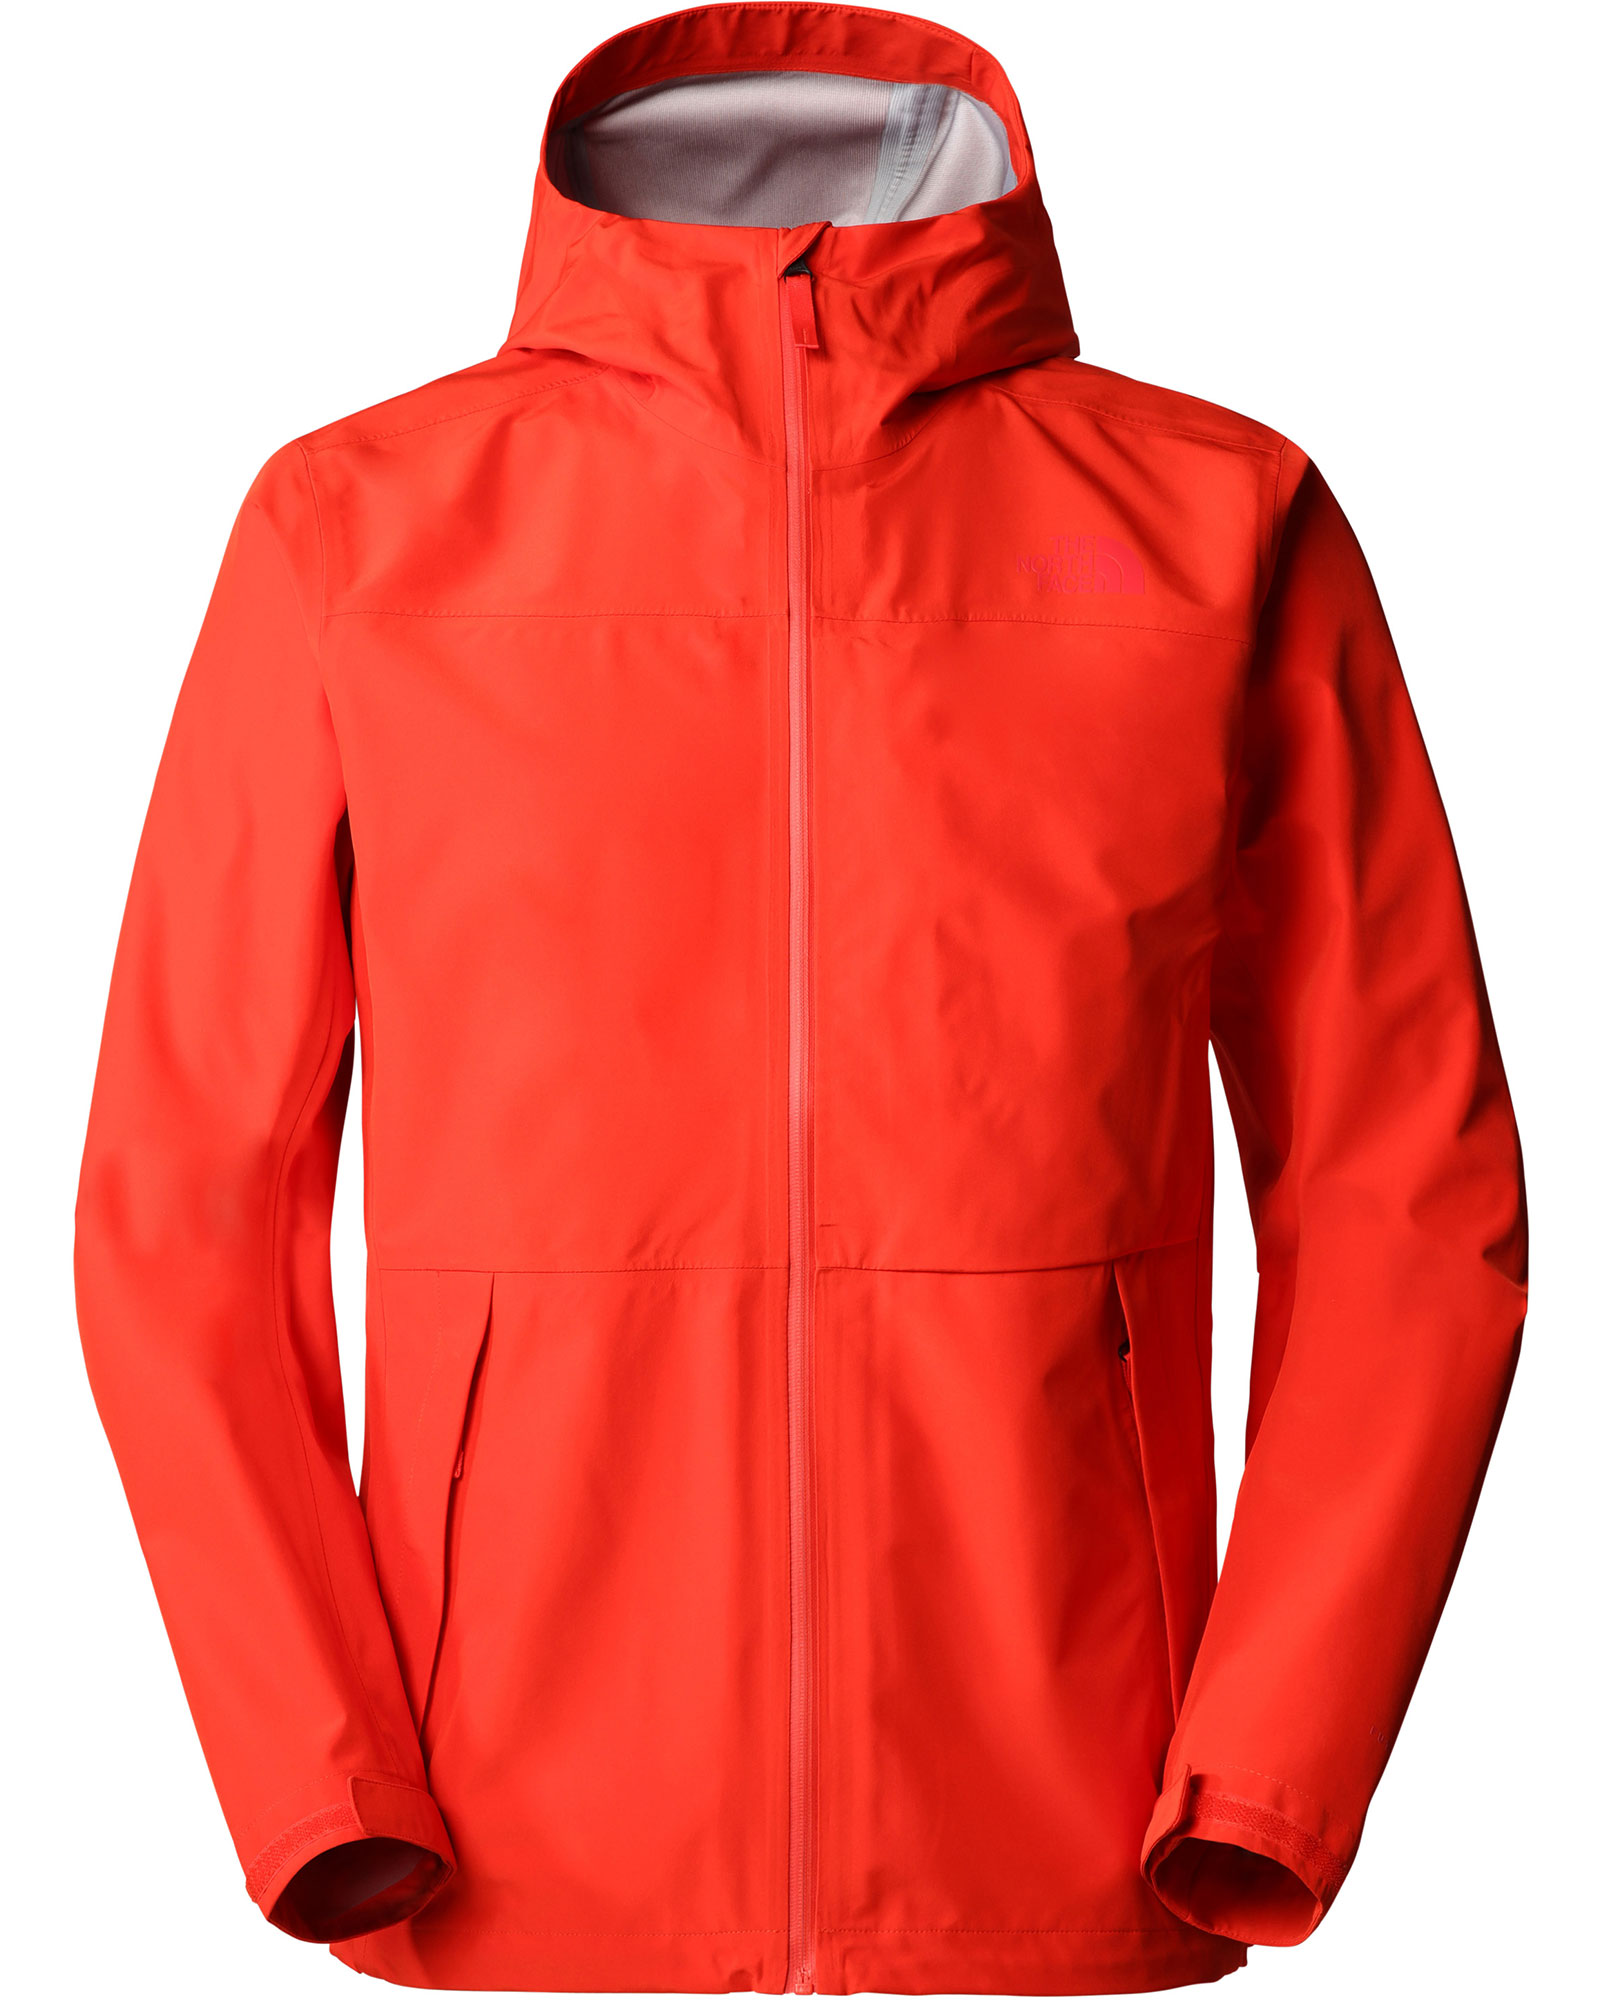 The North Face Dryzzle FUTURELIGHT Men’s Jacket - Fiery Red M